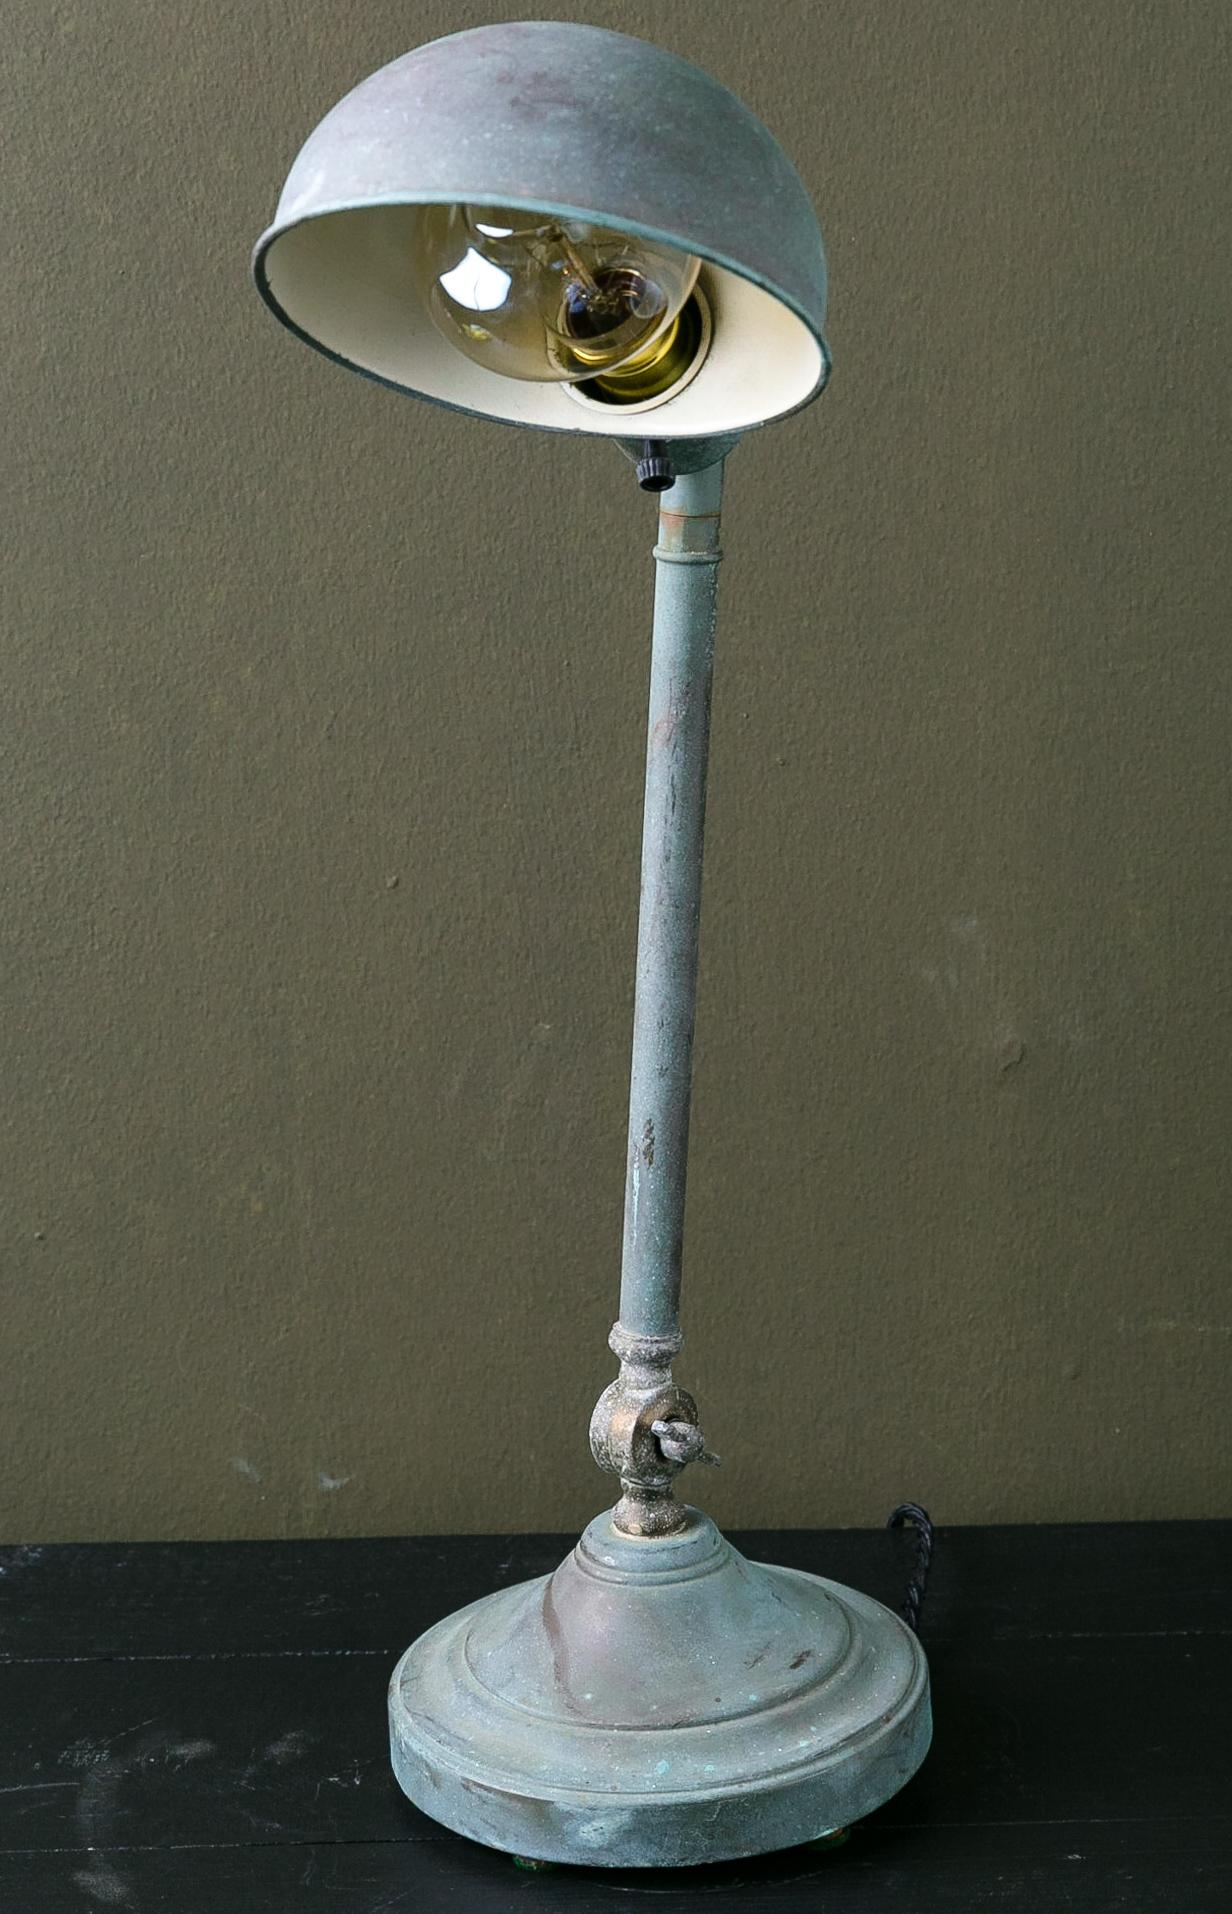 This desk or table lamp has been restored and rewired in the US keeping its authentic patina. It was wired using a porcelain socket. The patina is authentic and interesting. This sort of light can also be named task lighting.